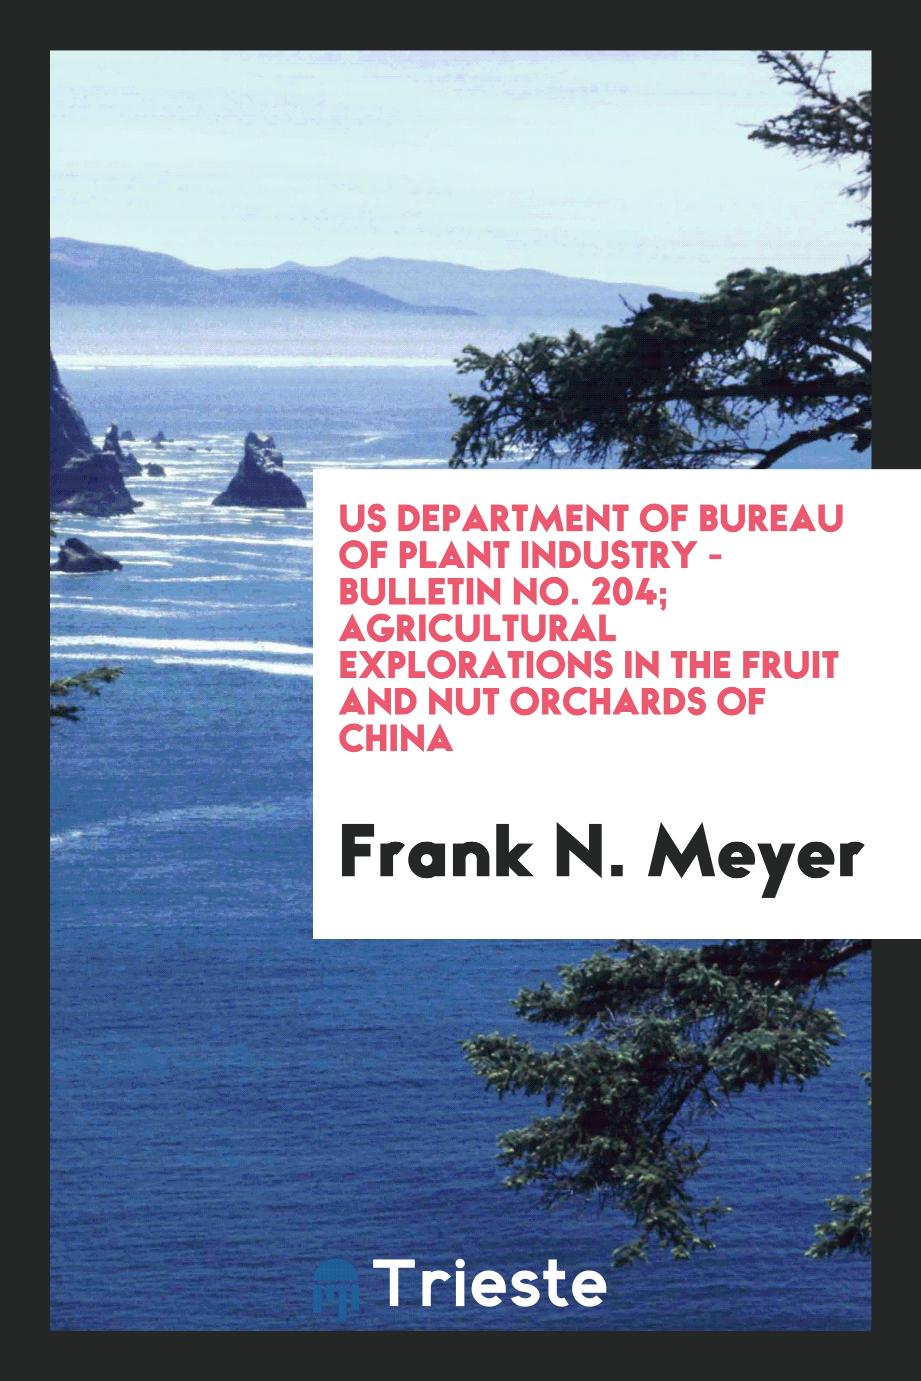 Us Department of Bureau of plant industry - bulletin No. 204; Agricultural Explorations in the Fruit and Nut Orchards of China